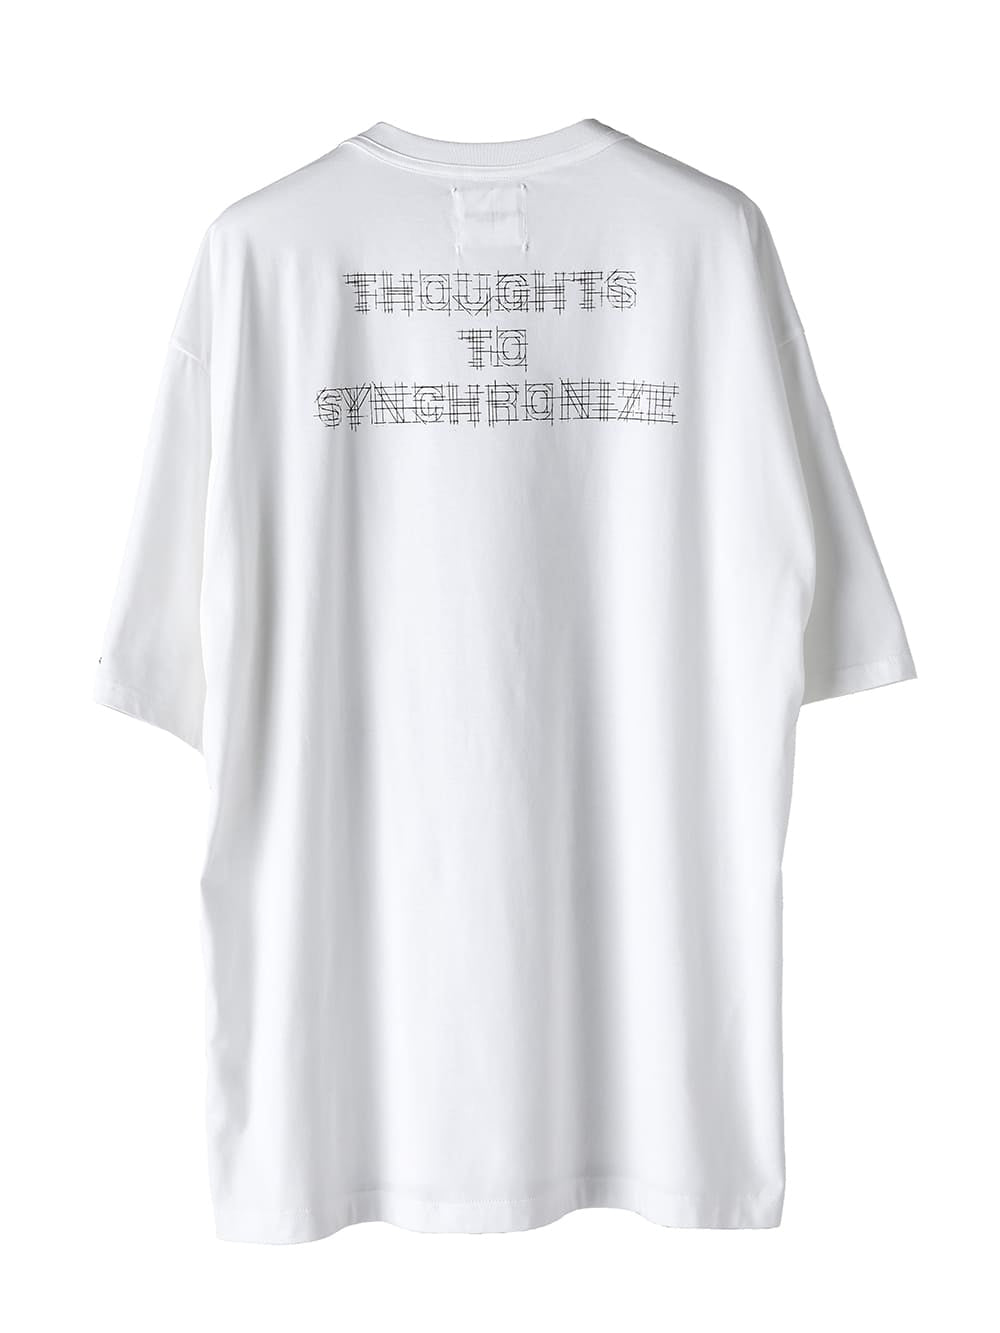 Thoughts to synchronize. (oversized s/s pocket tee)